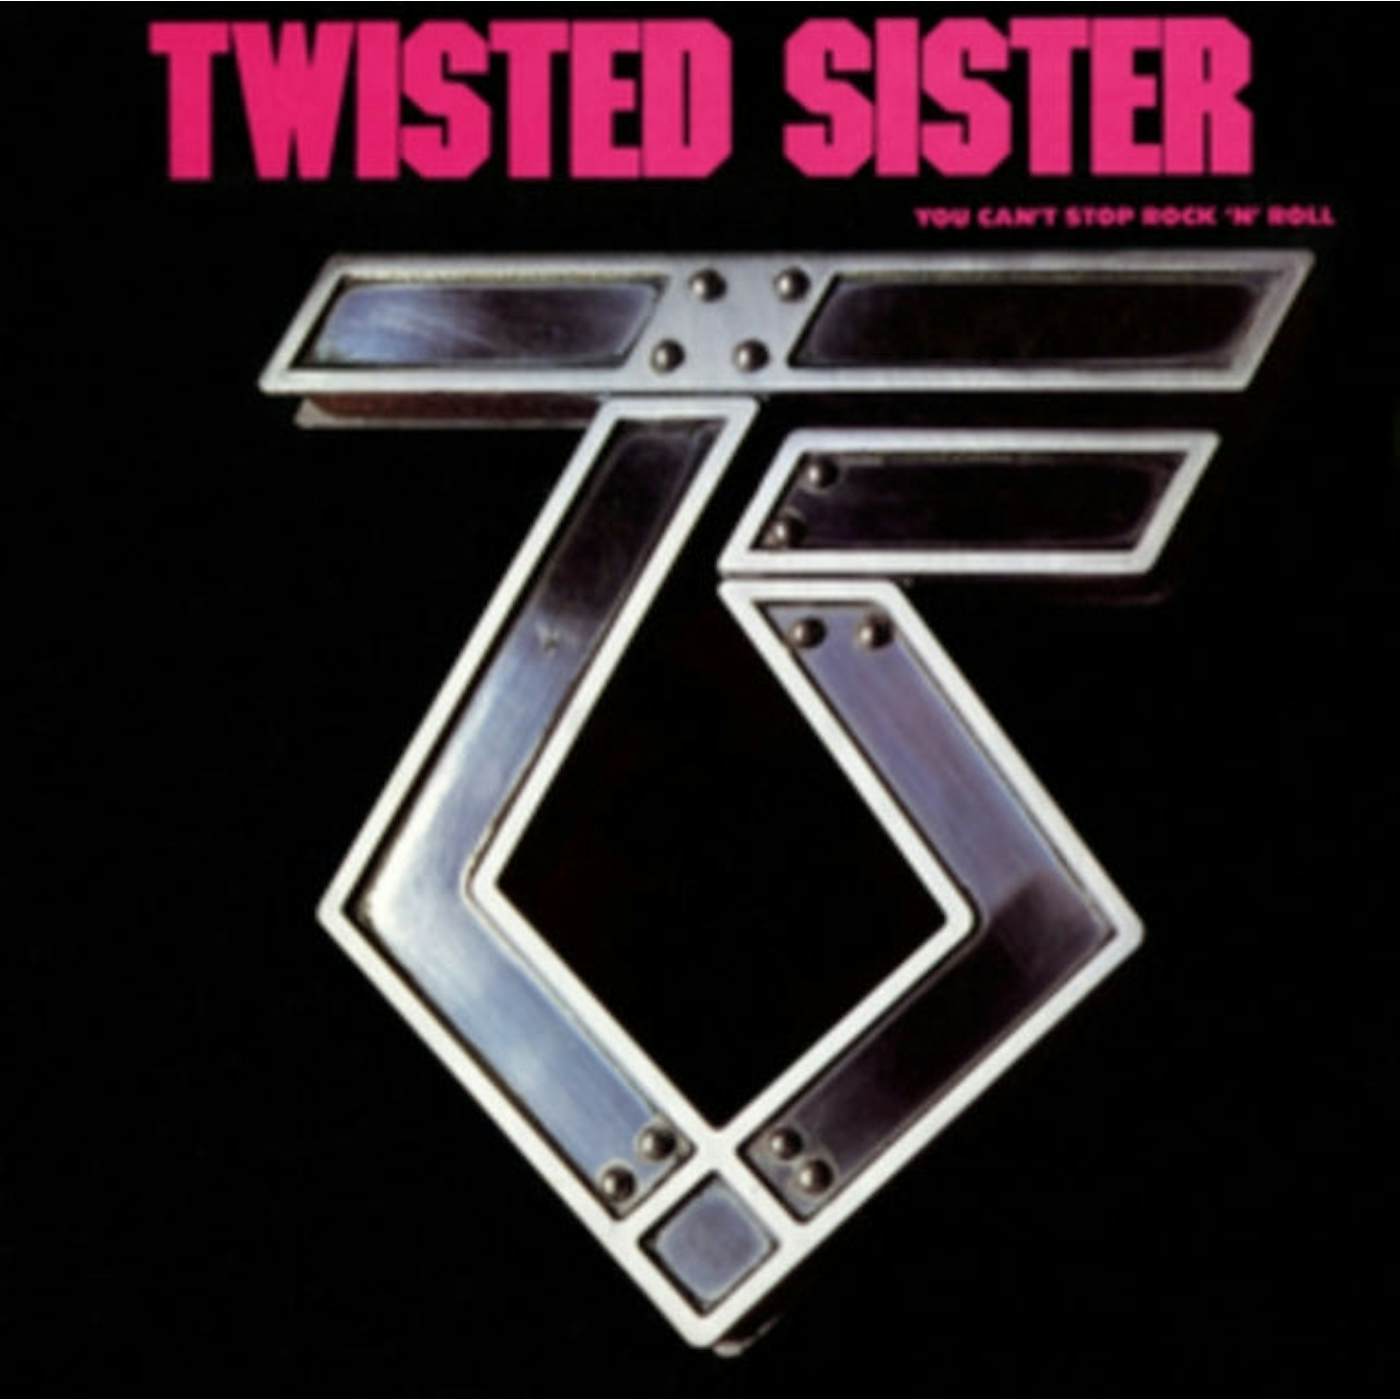 Twisted Sister CD - You Can't Stop Rock N Roll